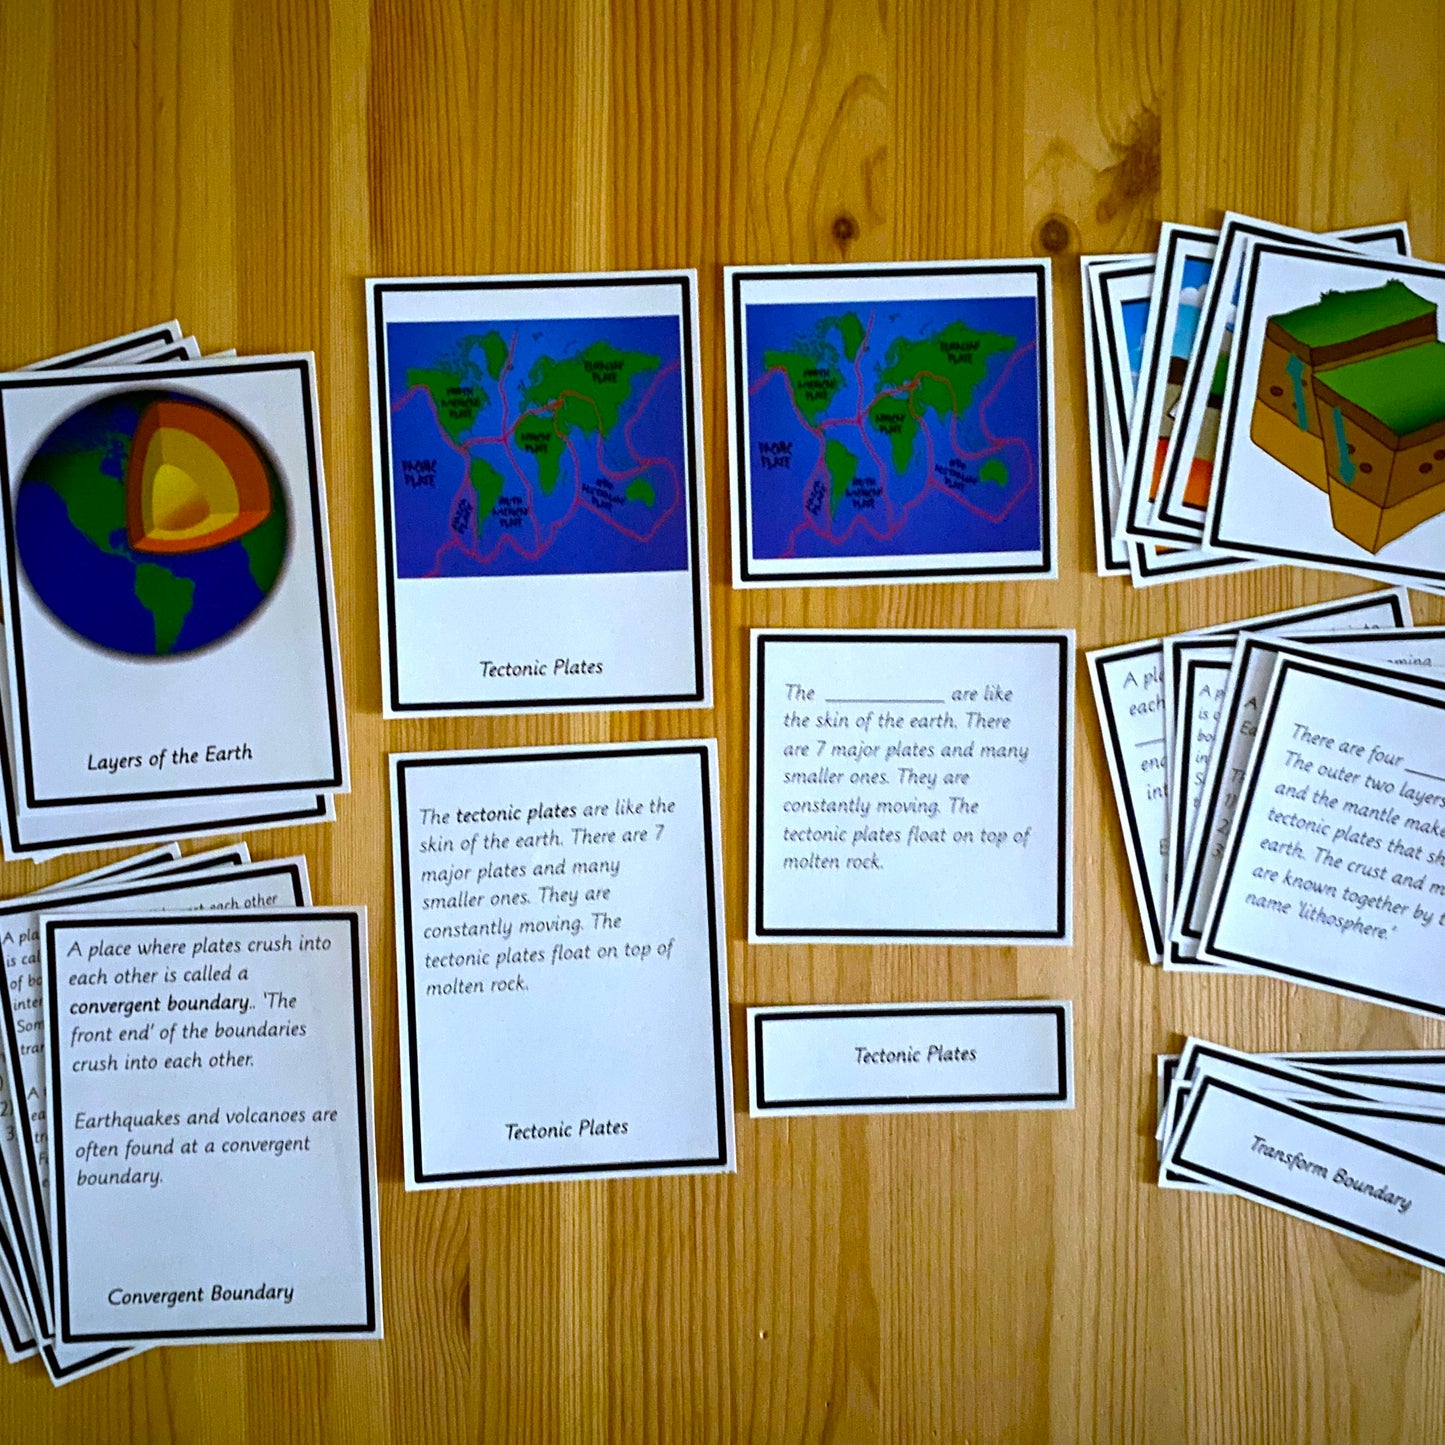 Plate tectonics vocabulary and lesson activities (geography) - montessorikiwi